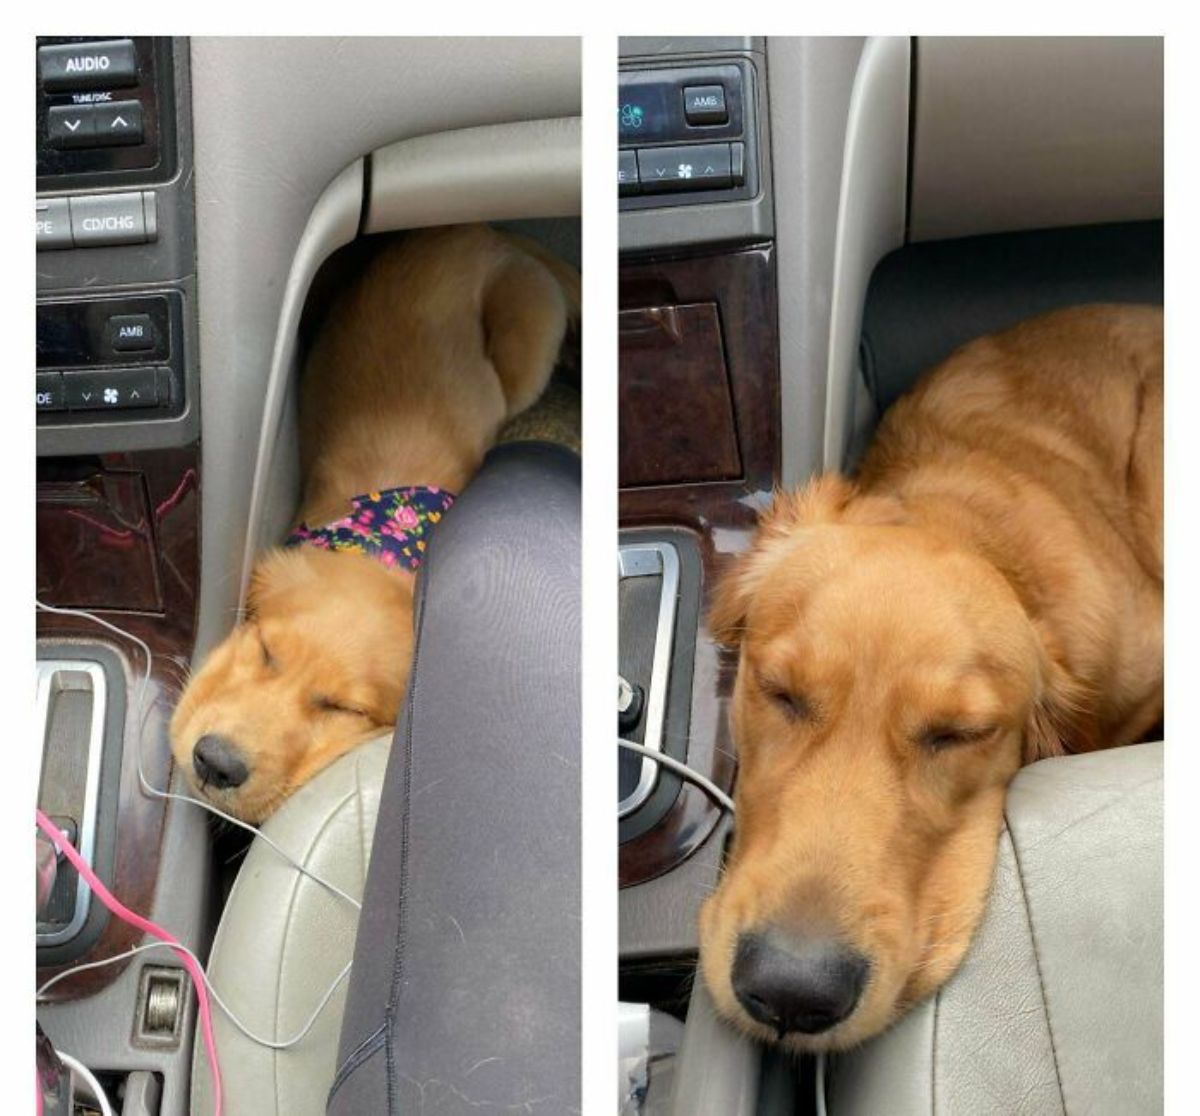 1 photo of golden retriever puppy sitting up and sleeping on the floor by the driver's seat and 1 photo of the same dog grown up